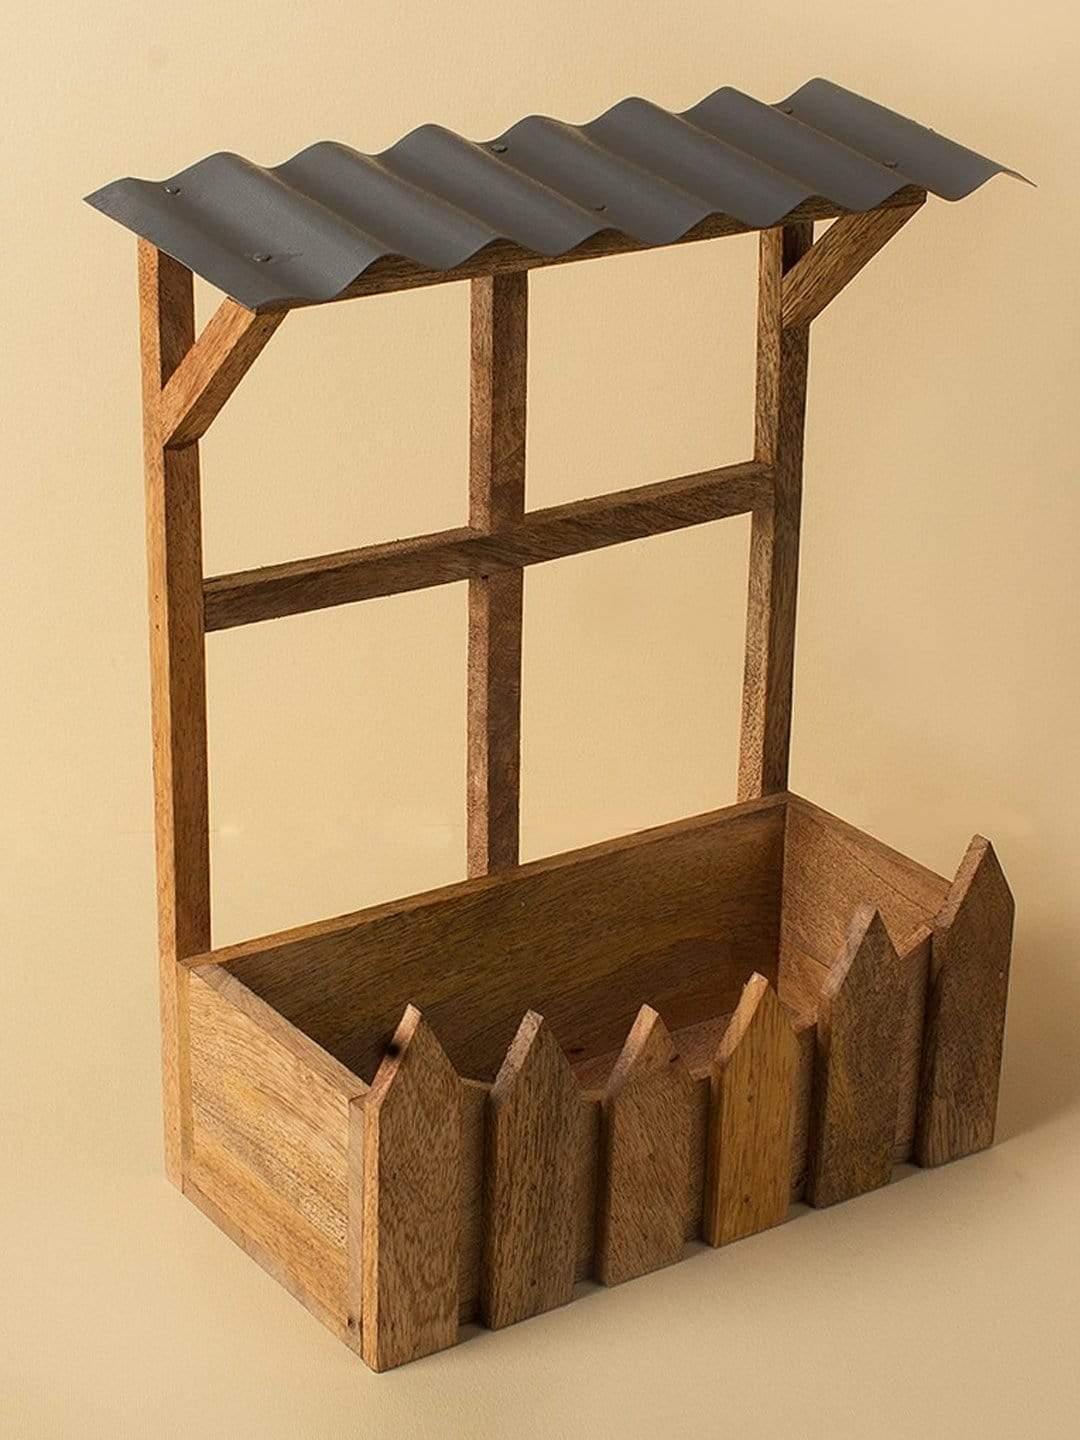 Wooden Hut Planter Holder - The Wishing Chair